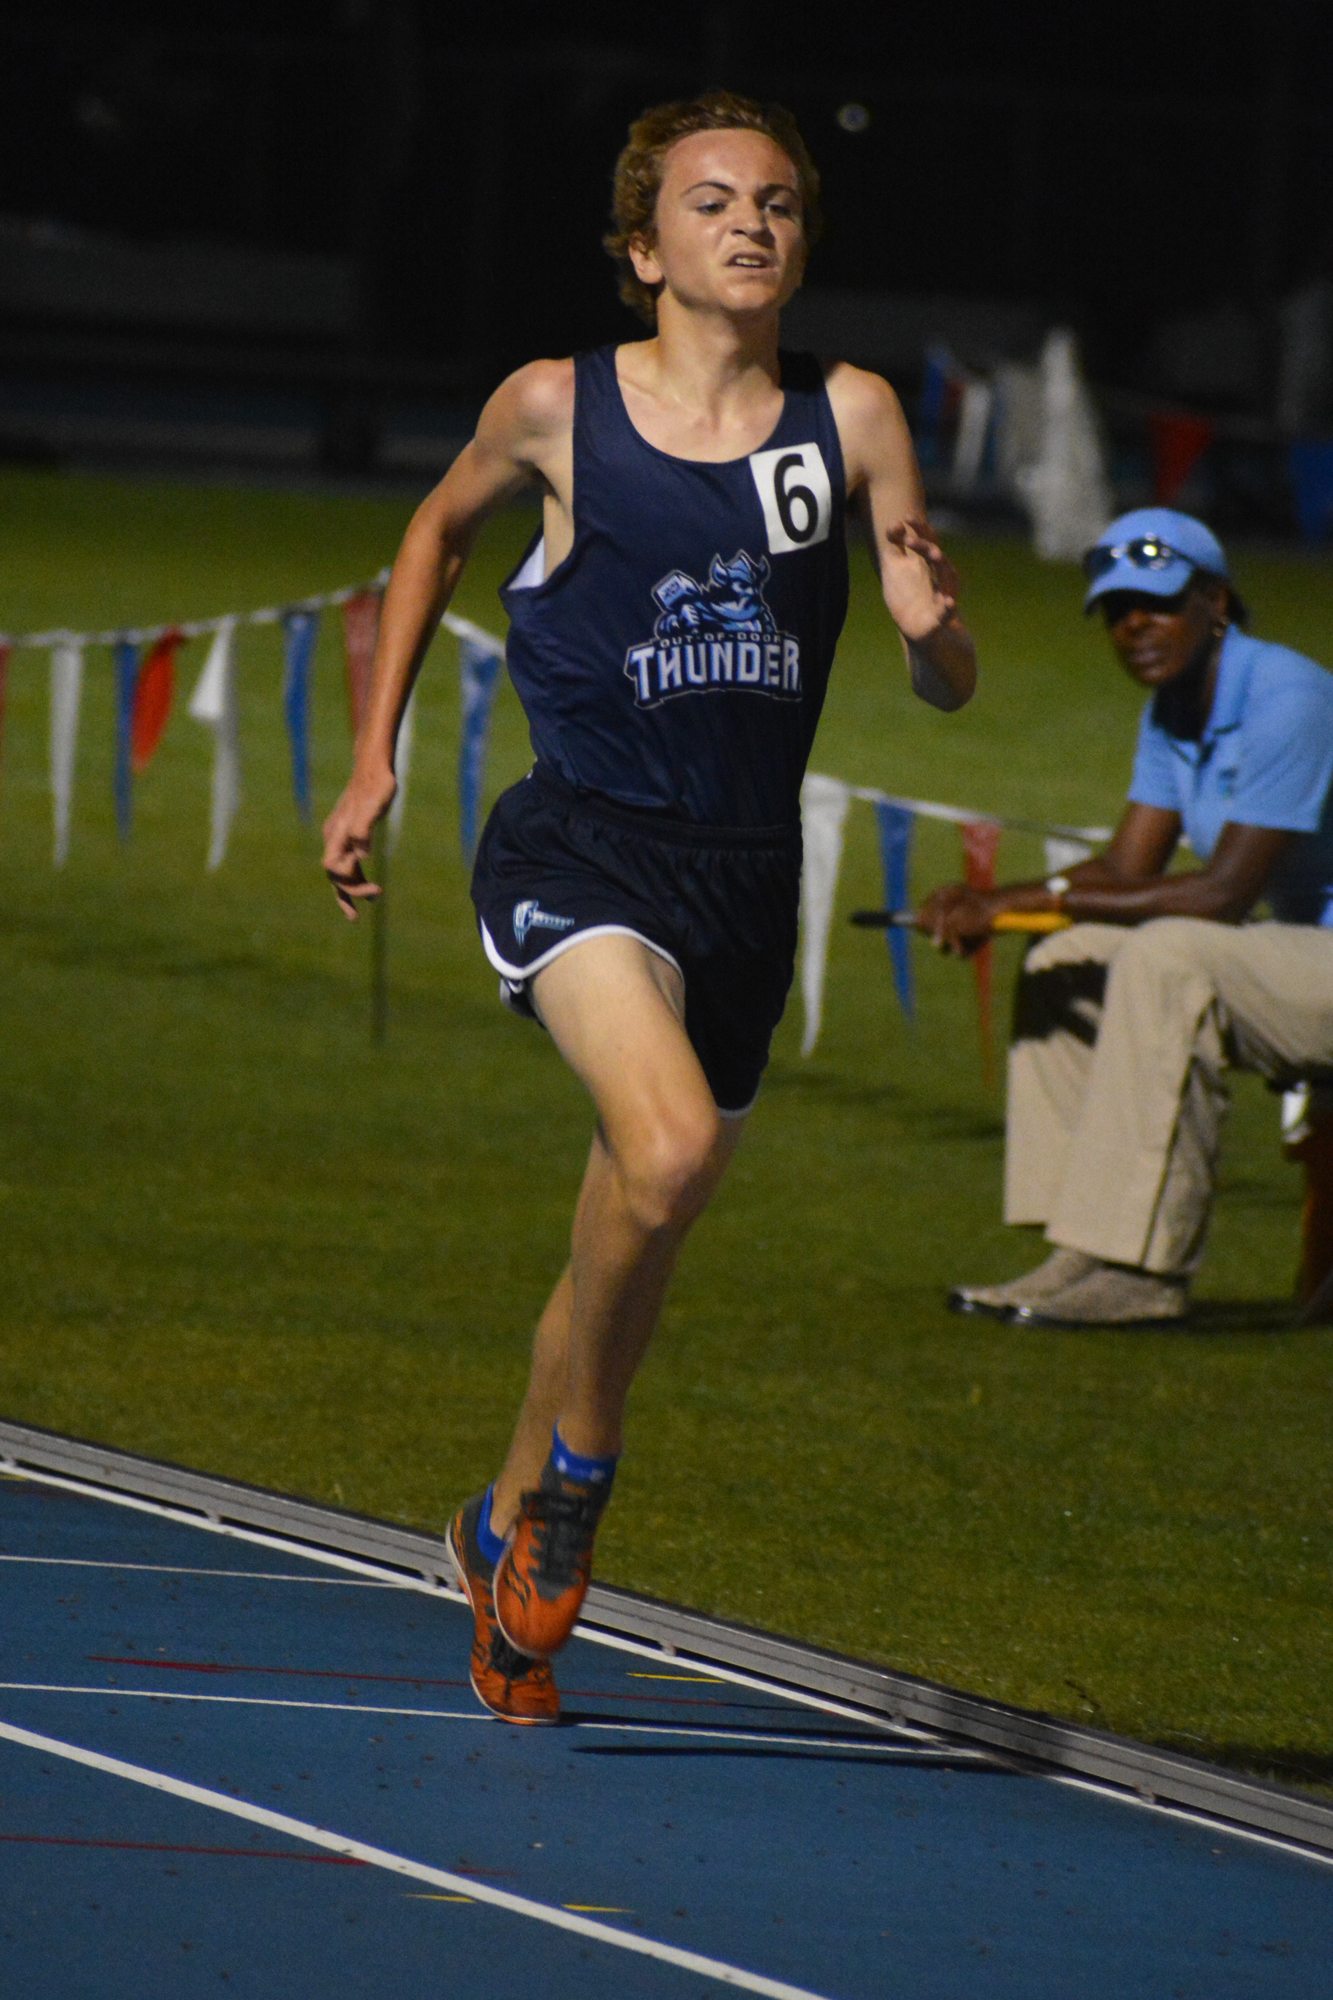 5. The Out-of-Door Academy's Tristan McWilliam, here running track, finished seventh at the state cross country meet.